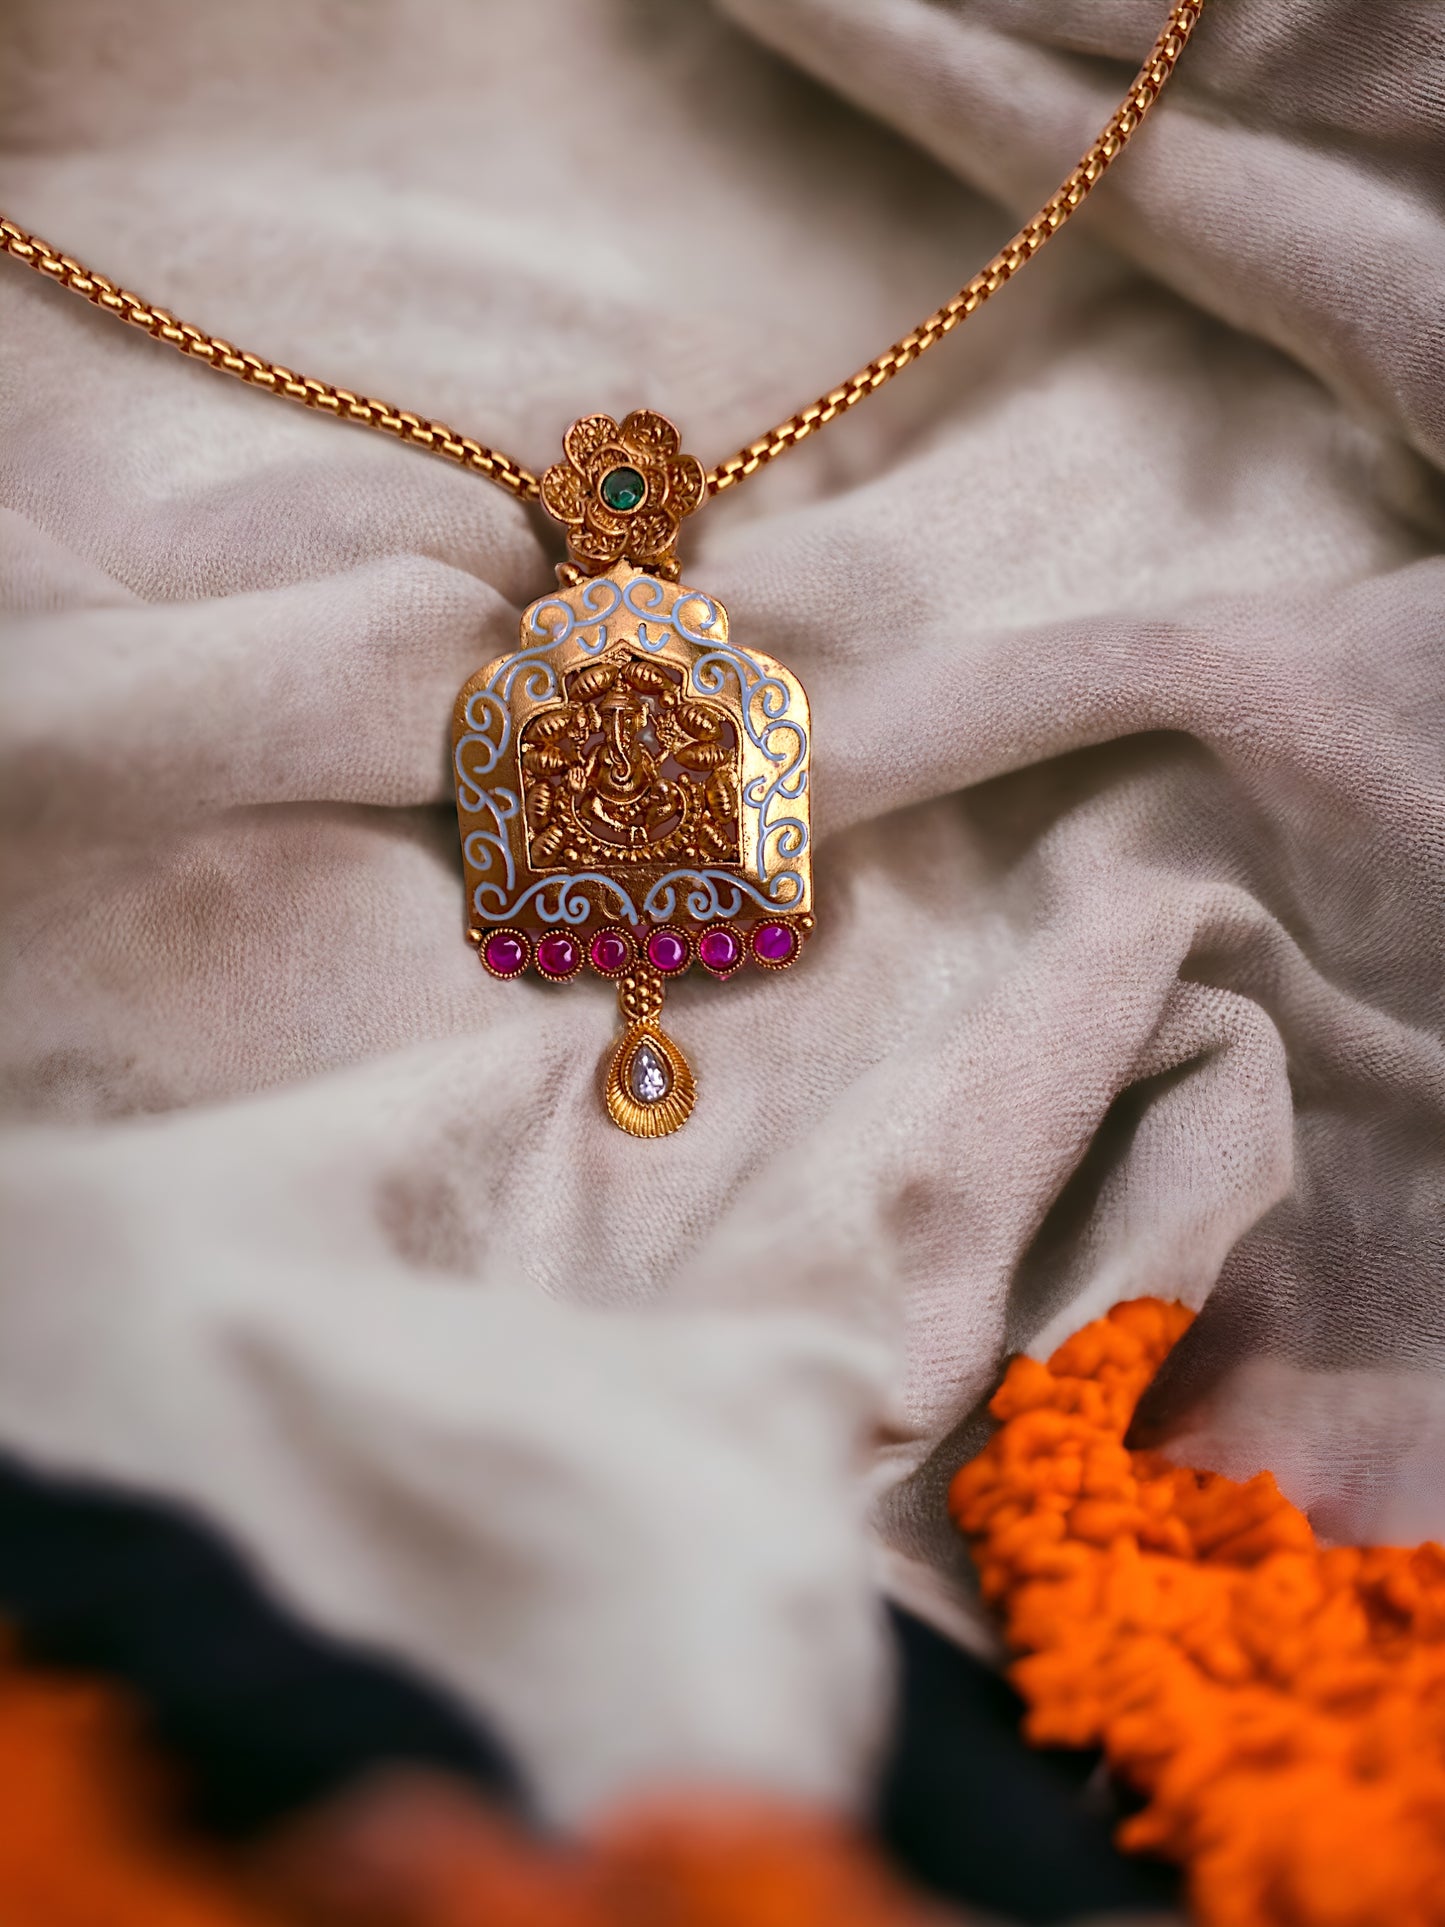 Ganesh Grand Pendant with Earring Gold Plated